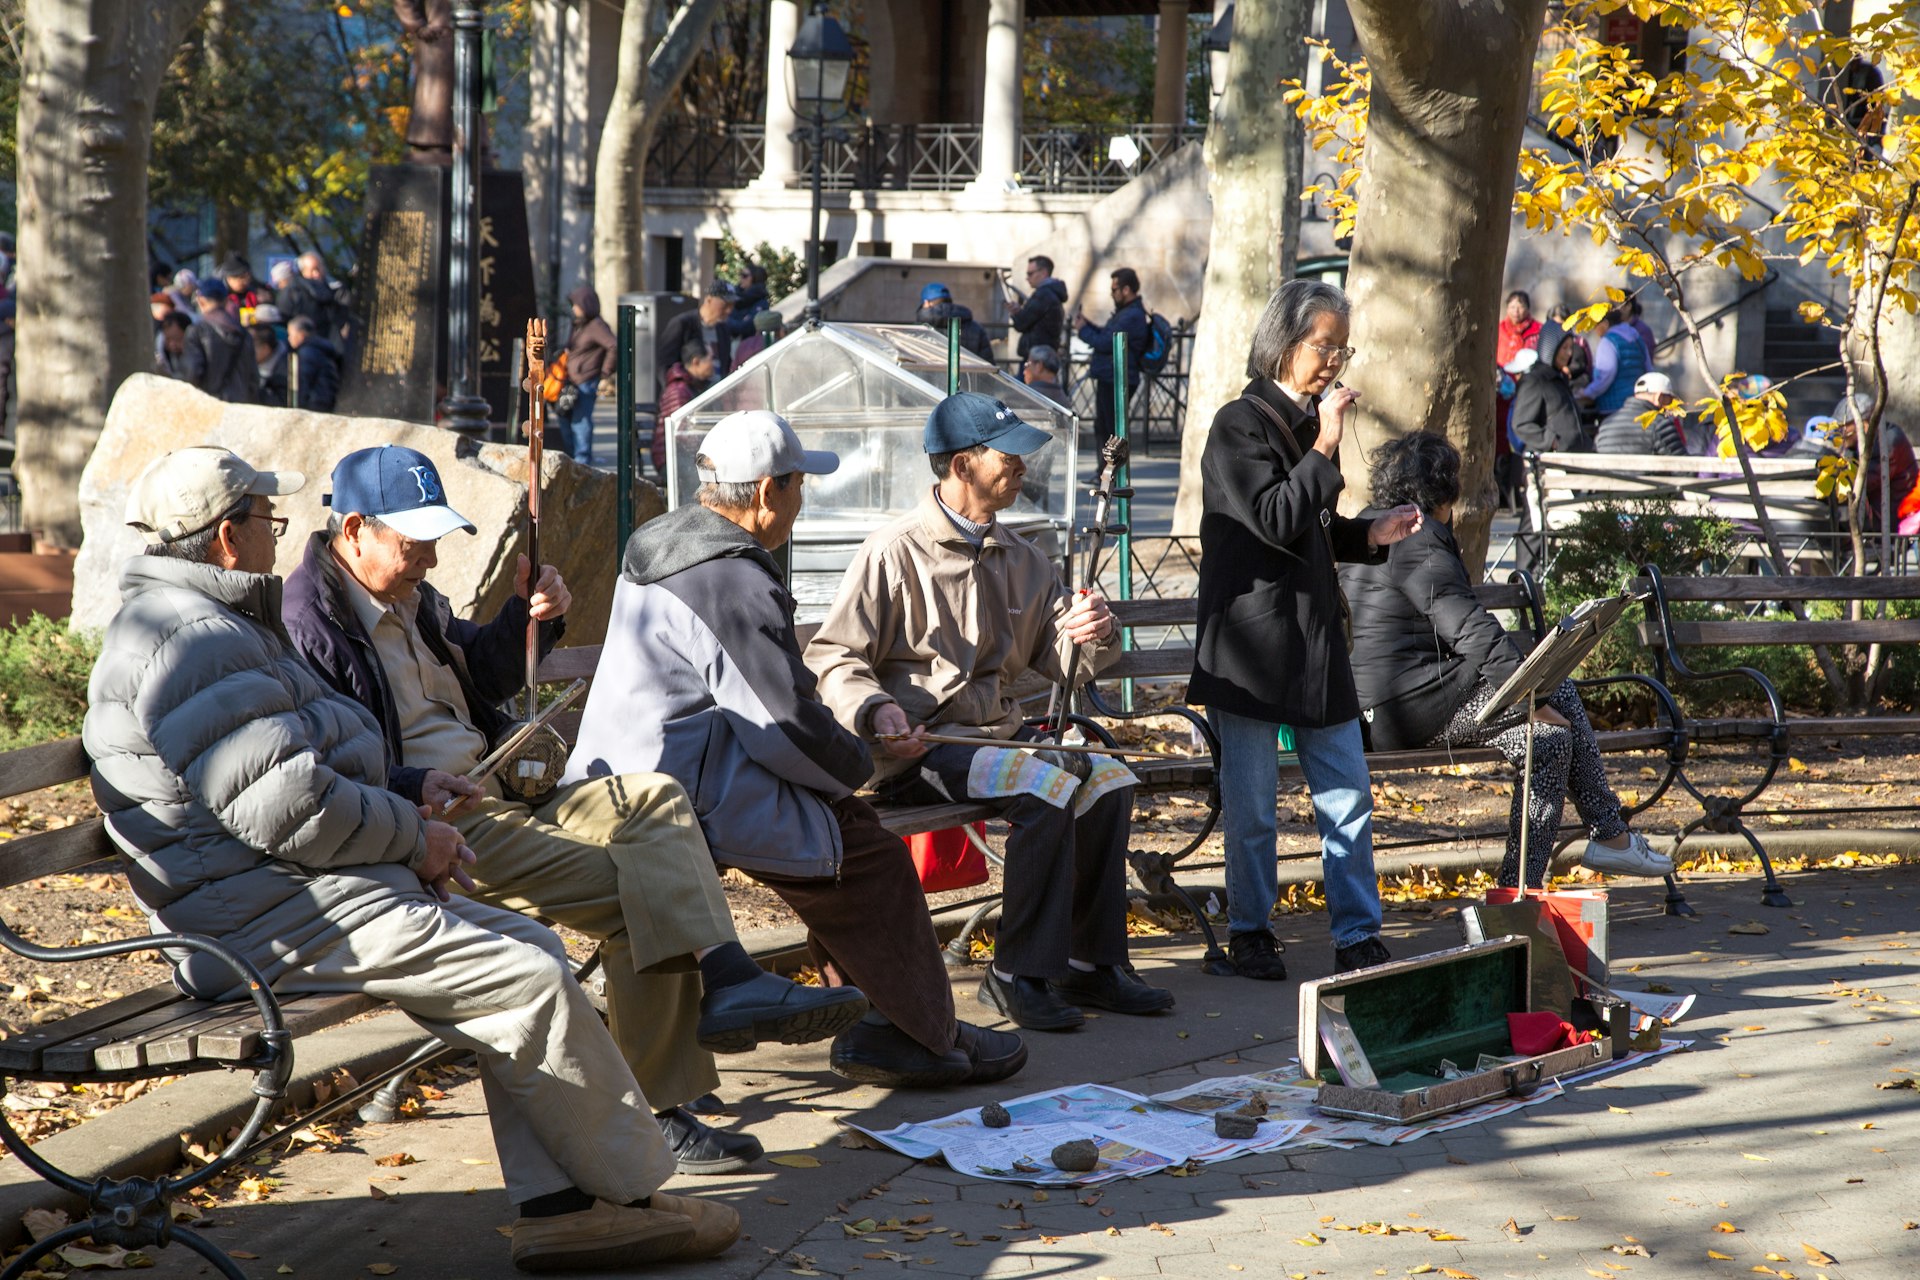 A group of elderly Chinese people performing music in Columbus Park in Chinatown 